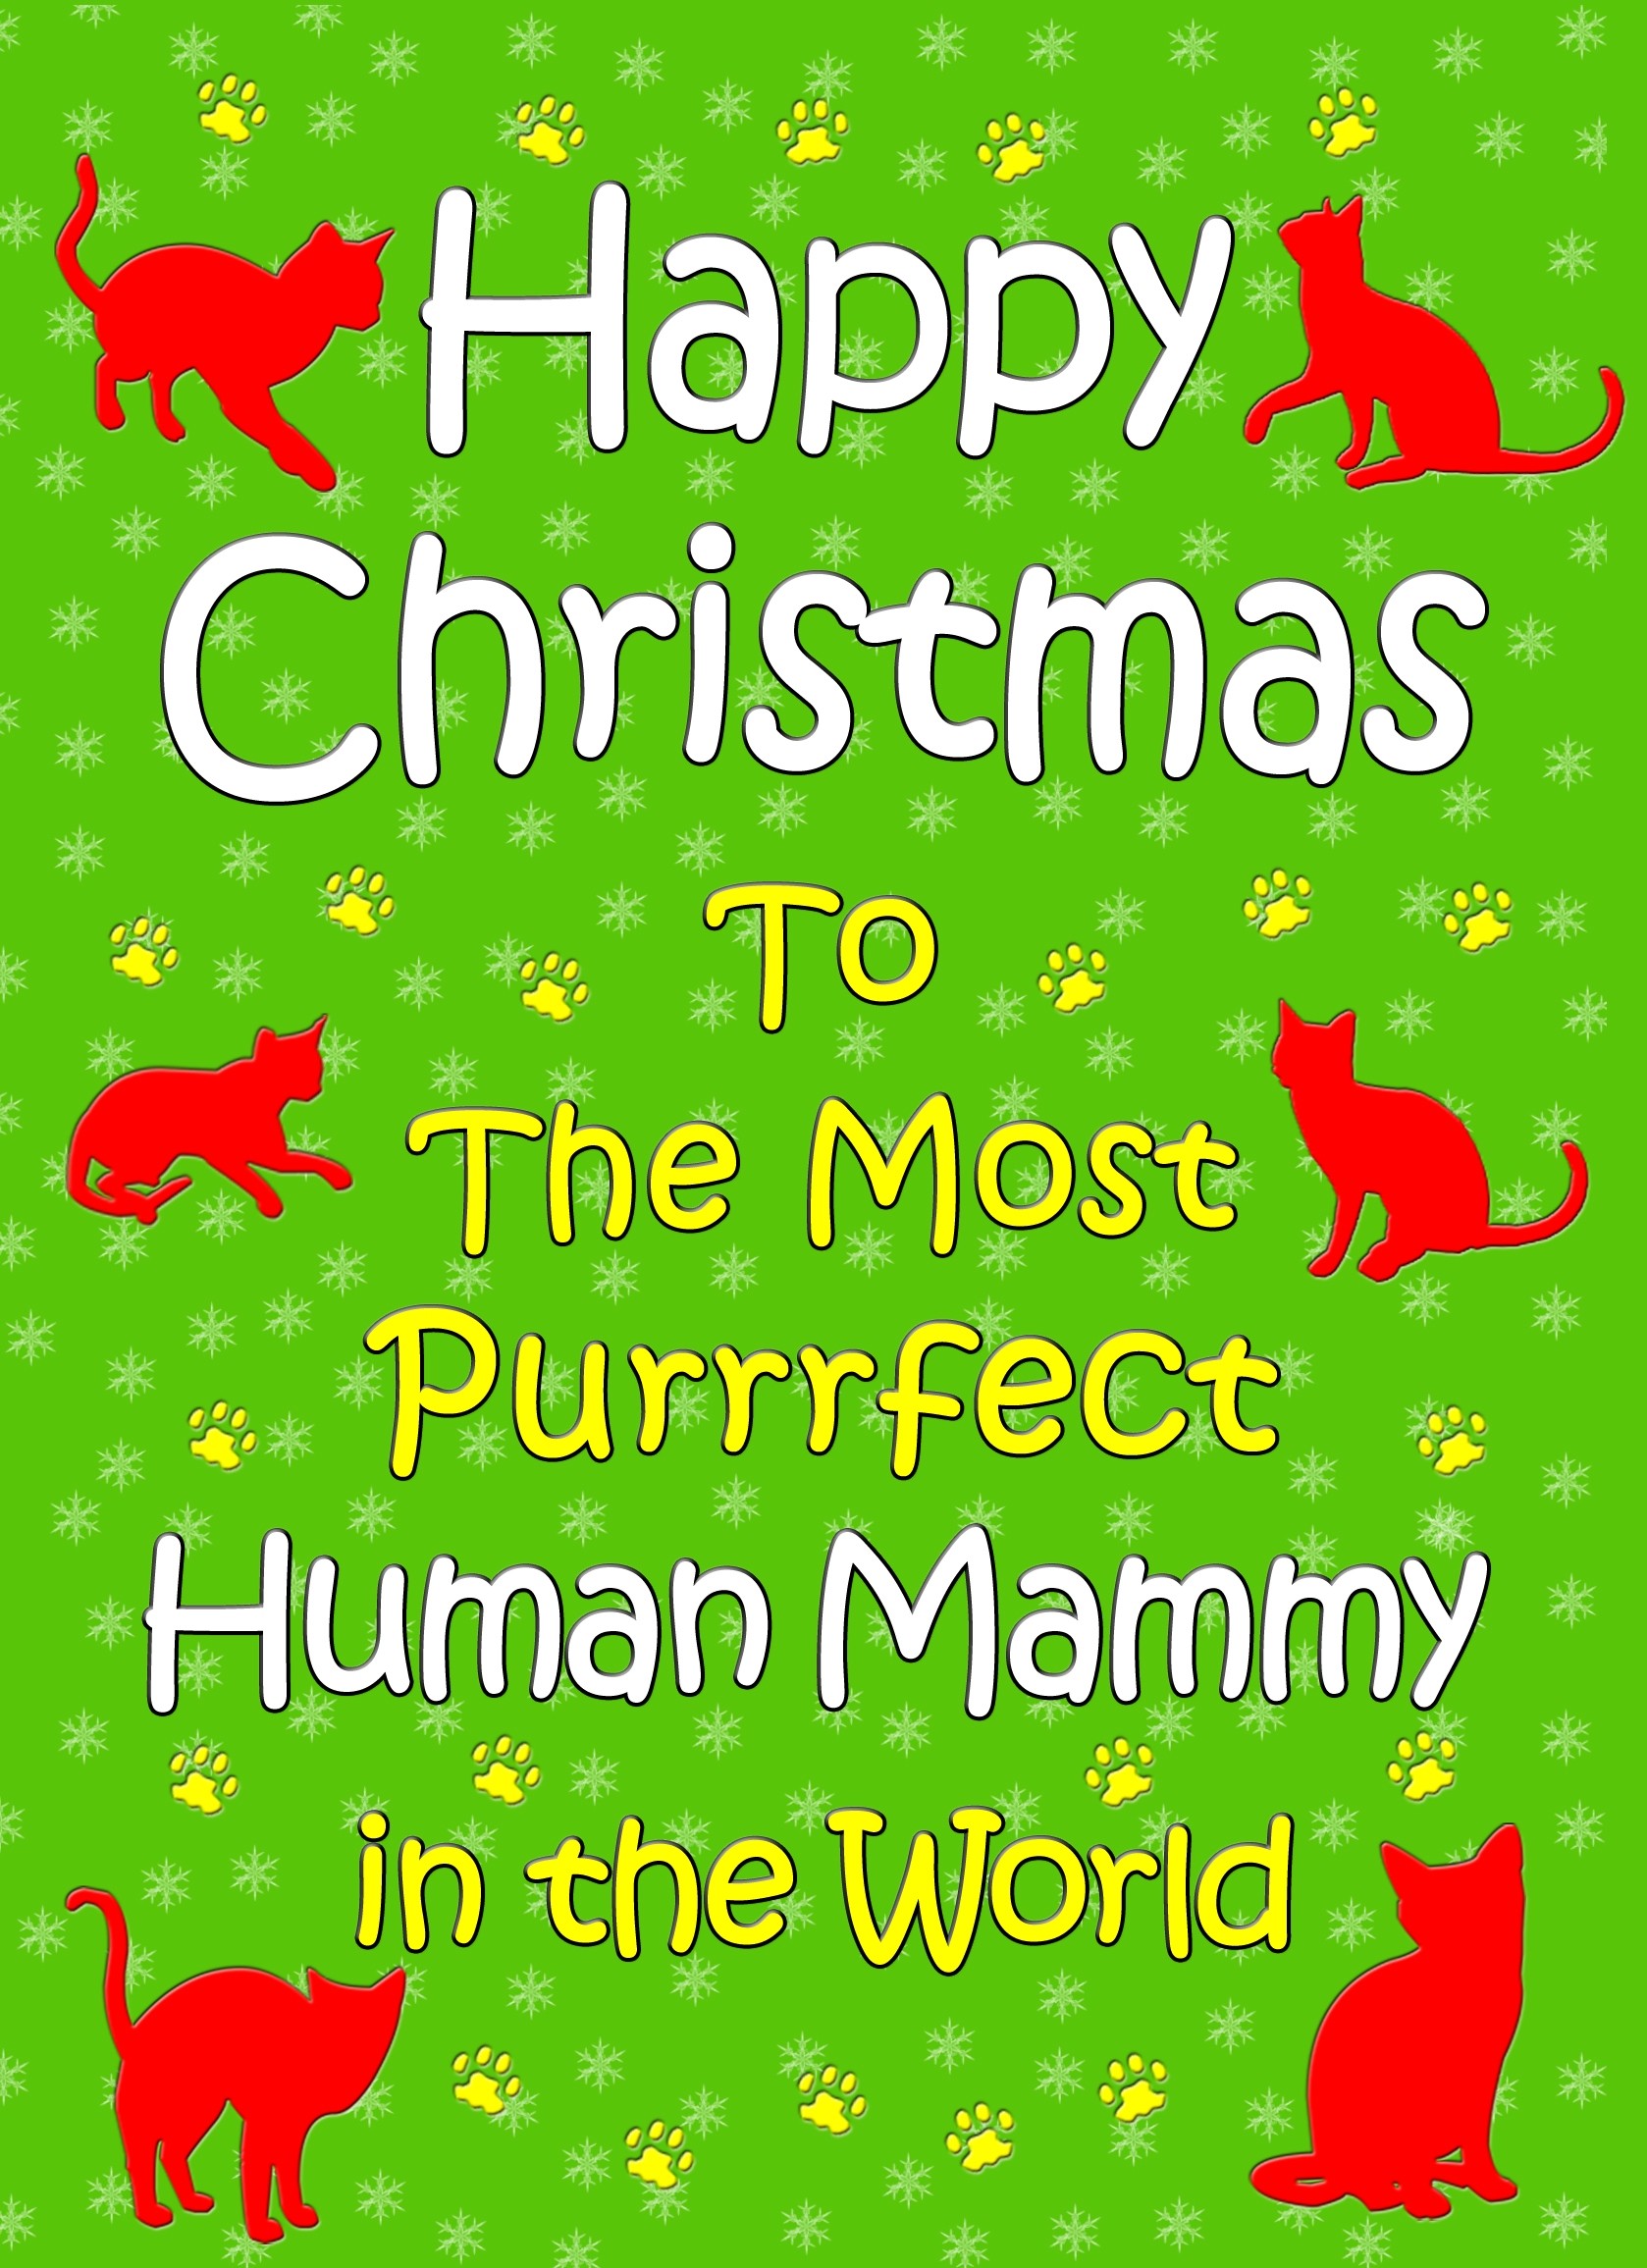 From The Cat Christmas Card (Human Mammy, Green)